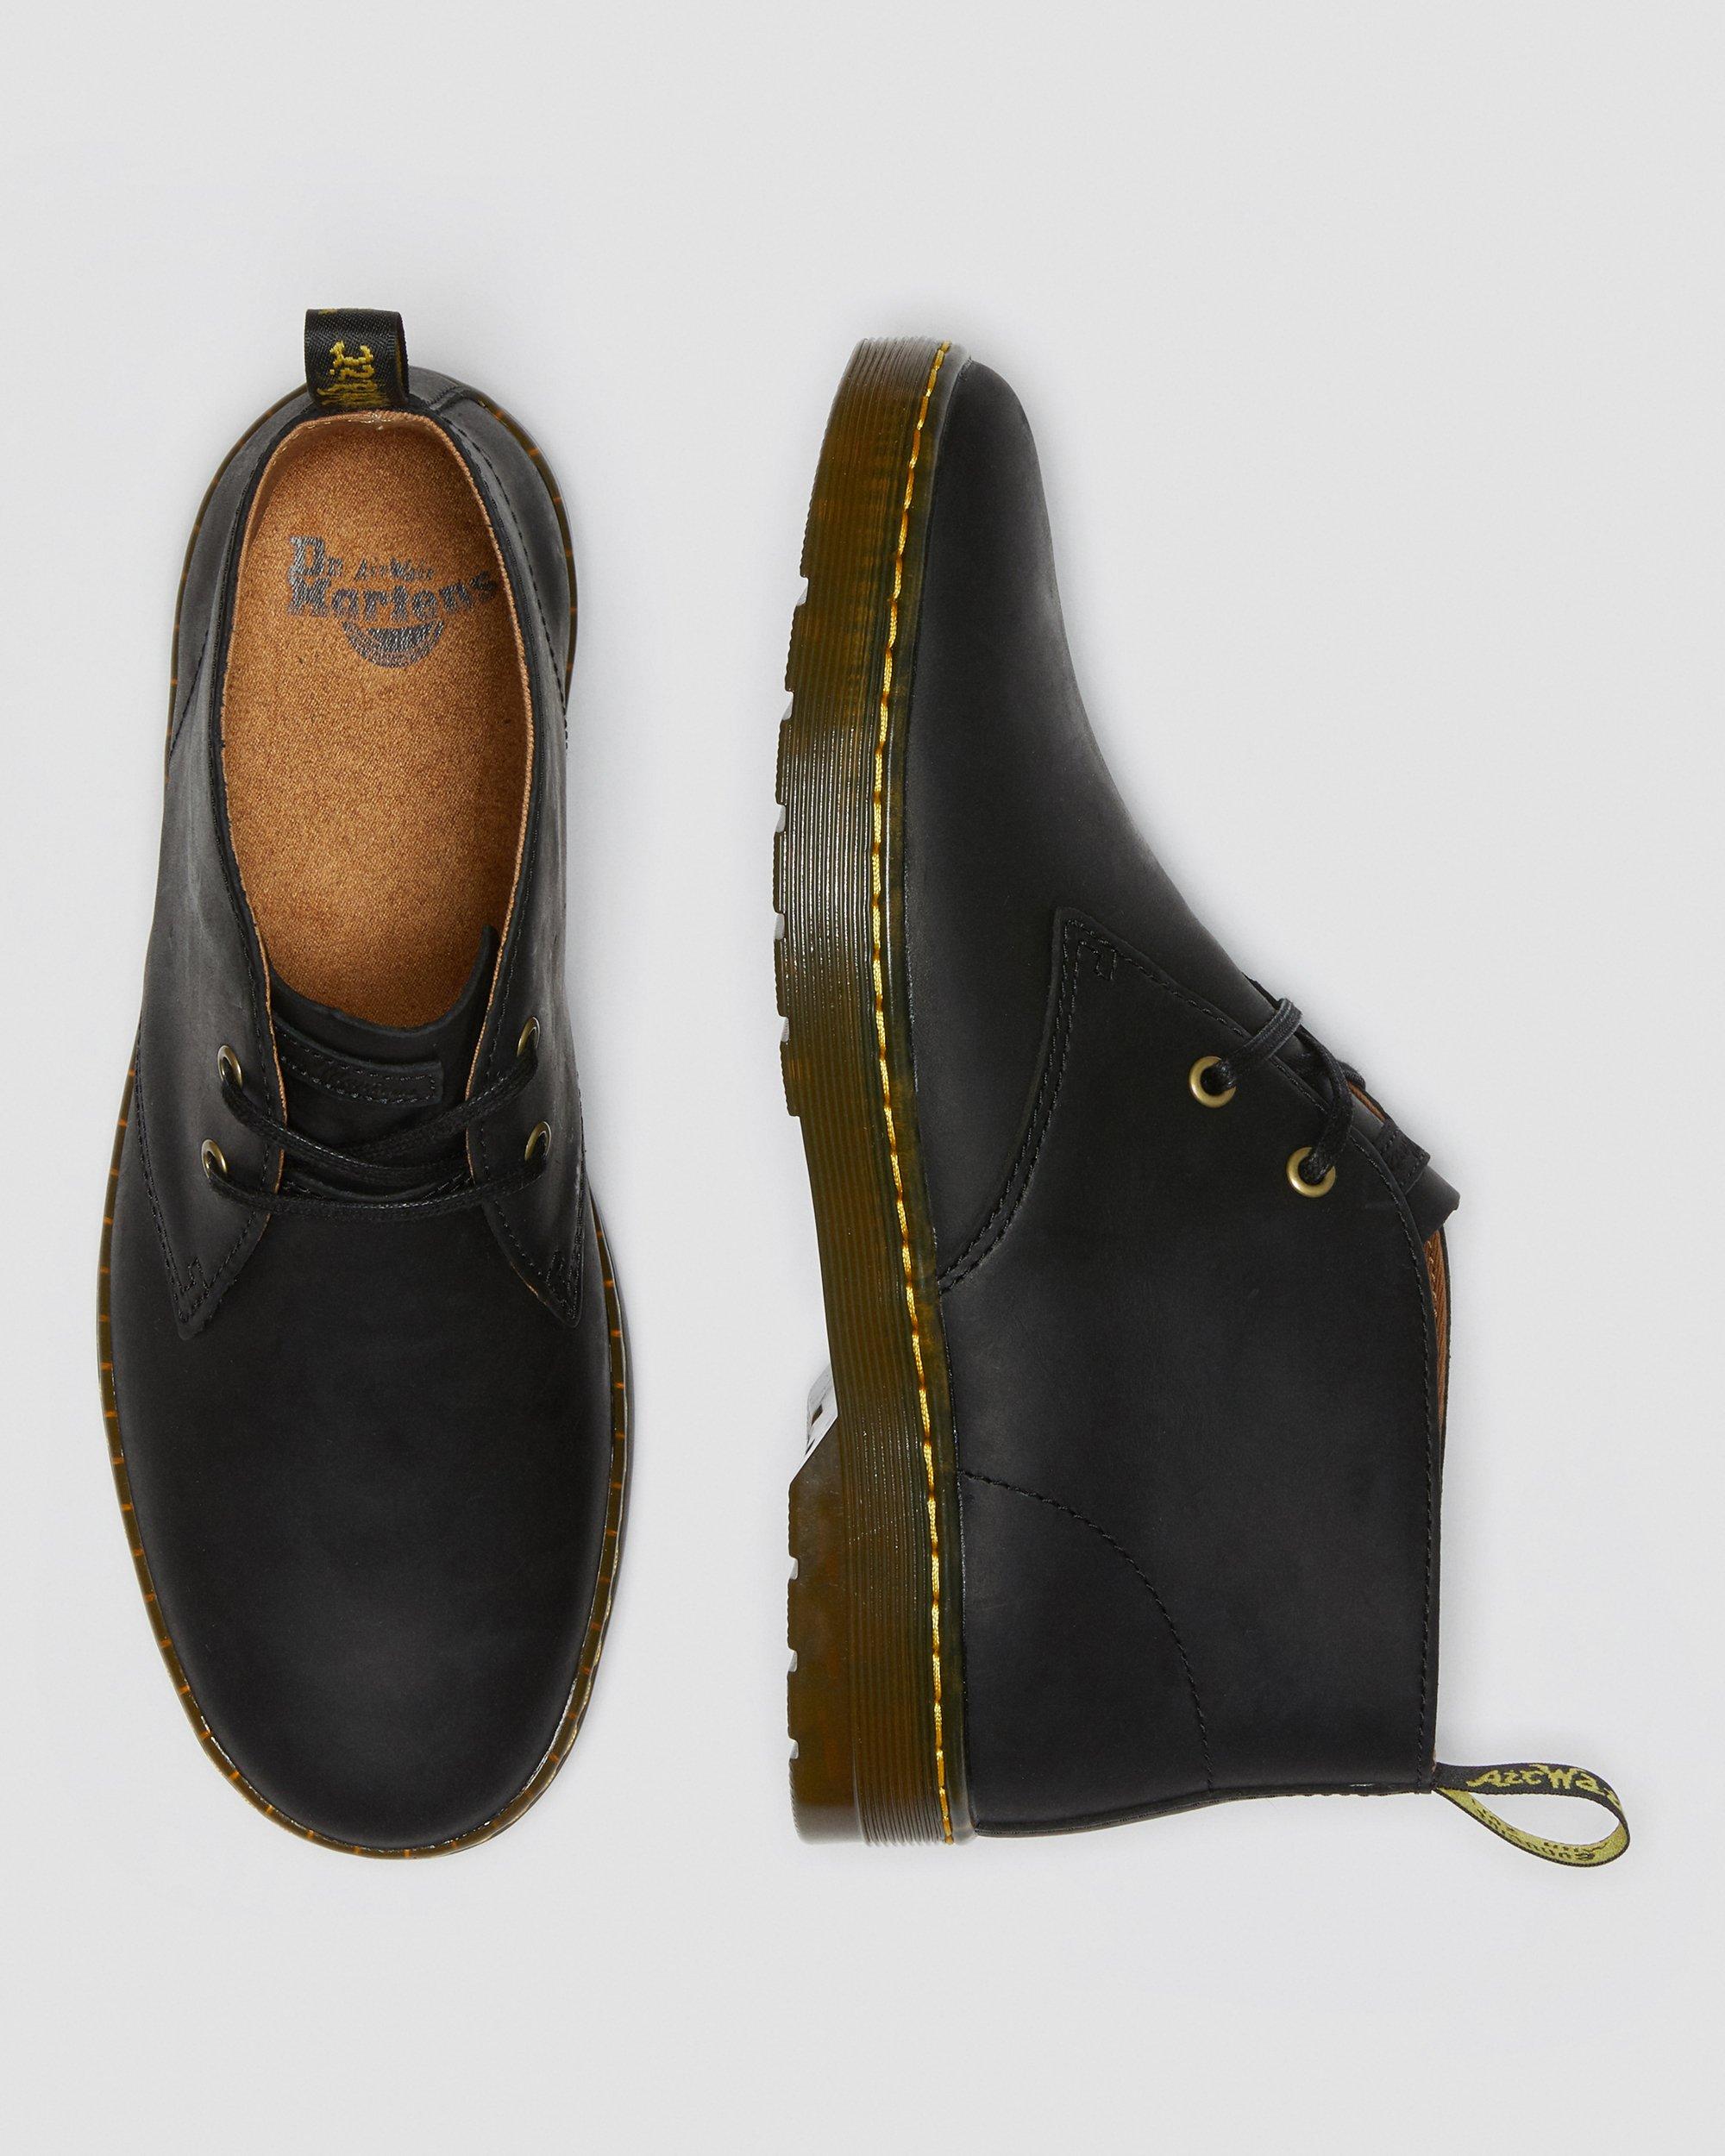 CABRILLO MEN'S WYOMING LEATHER DESERT BOOTS | Dr. Martens Official